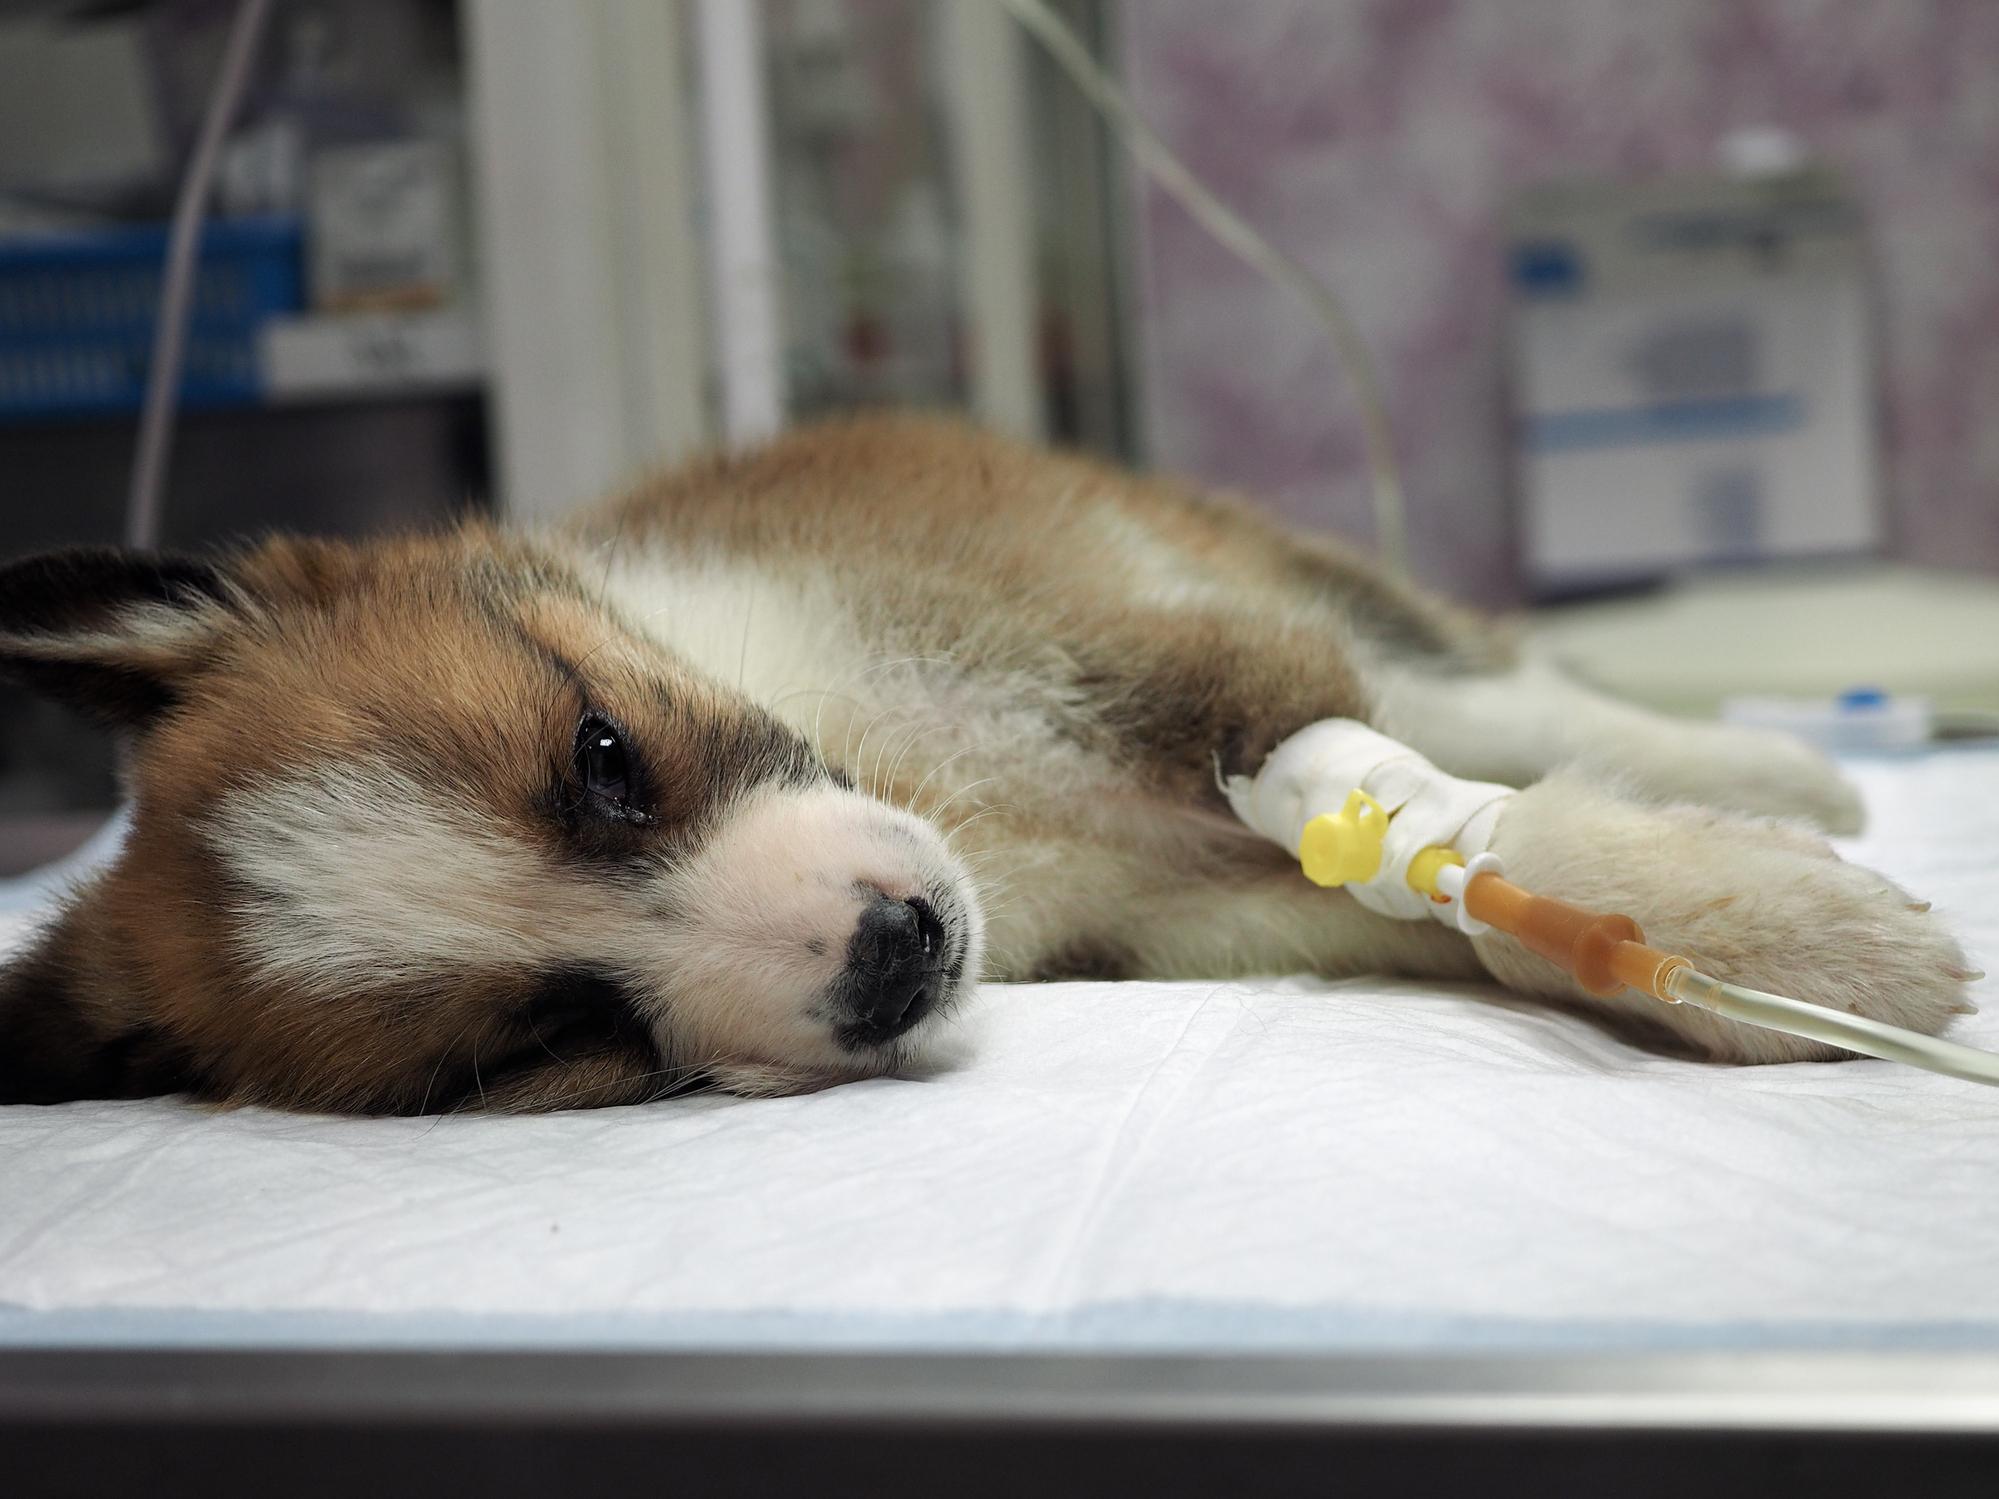 Puppy lays on veterinary table with intravenous medicine being dispensed prior to surgery